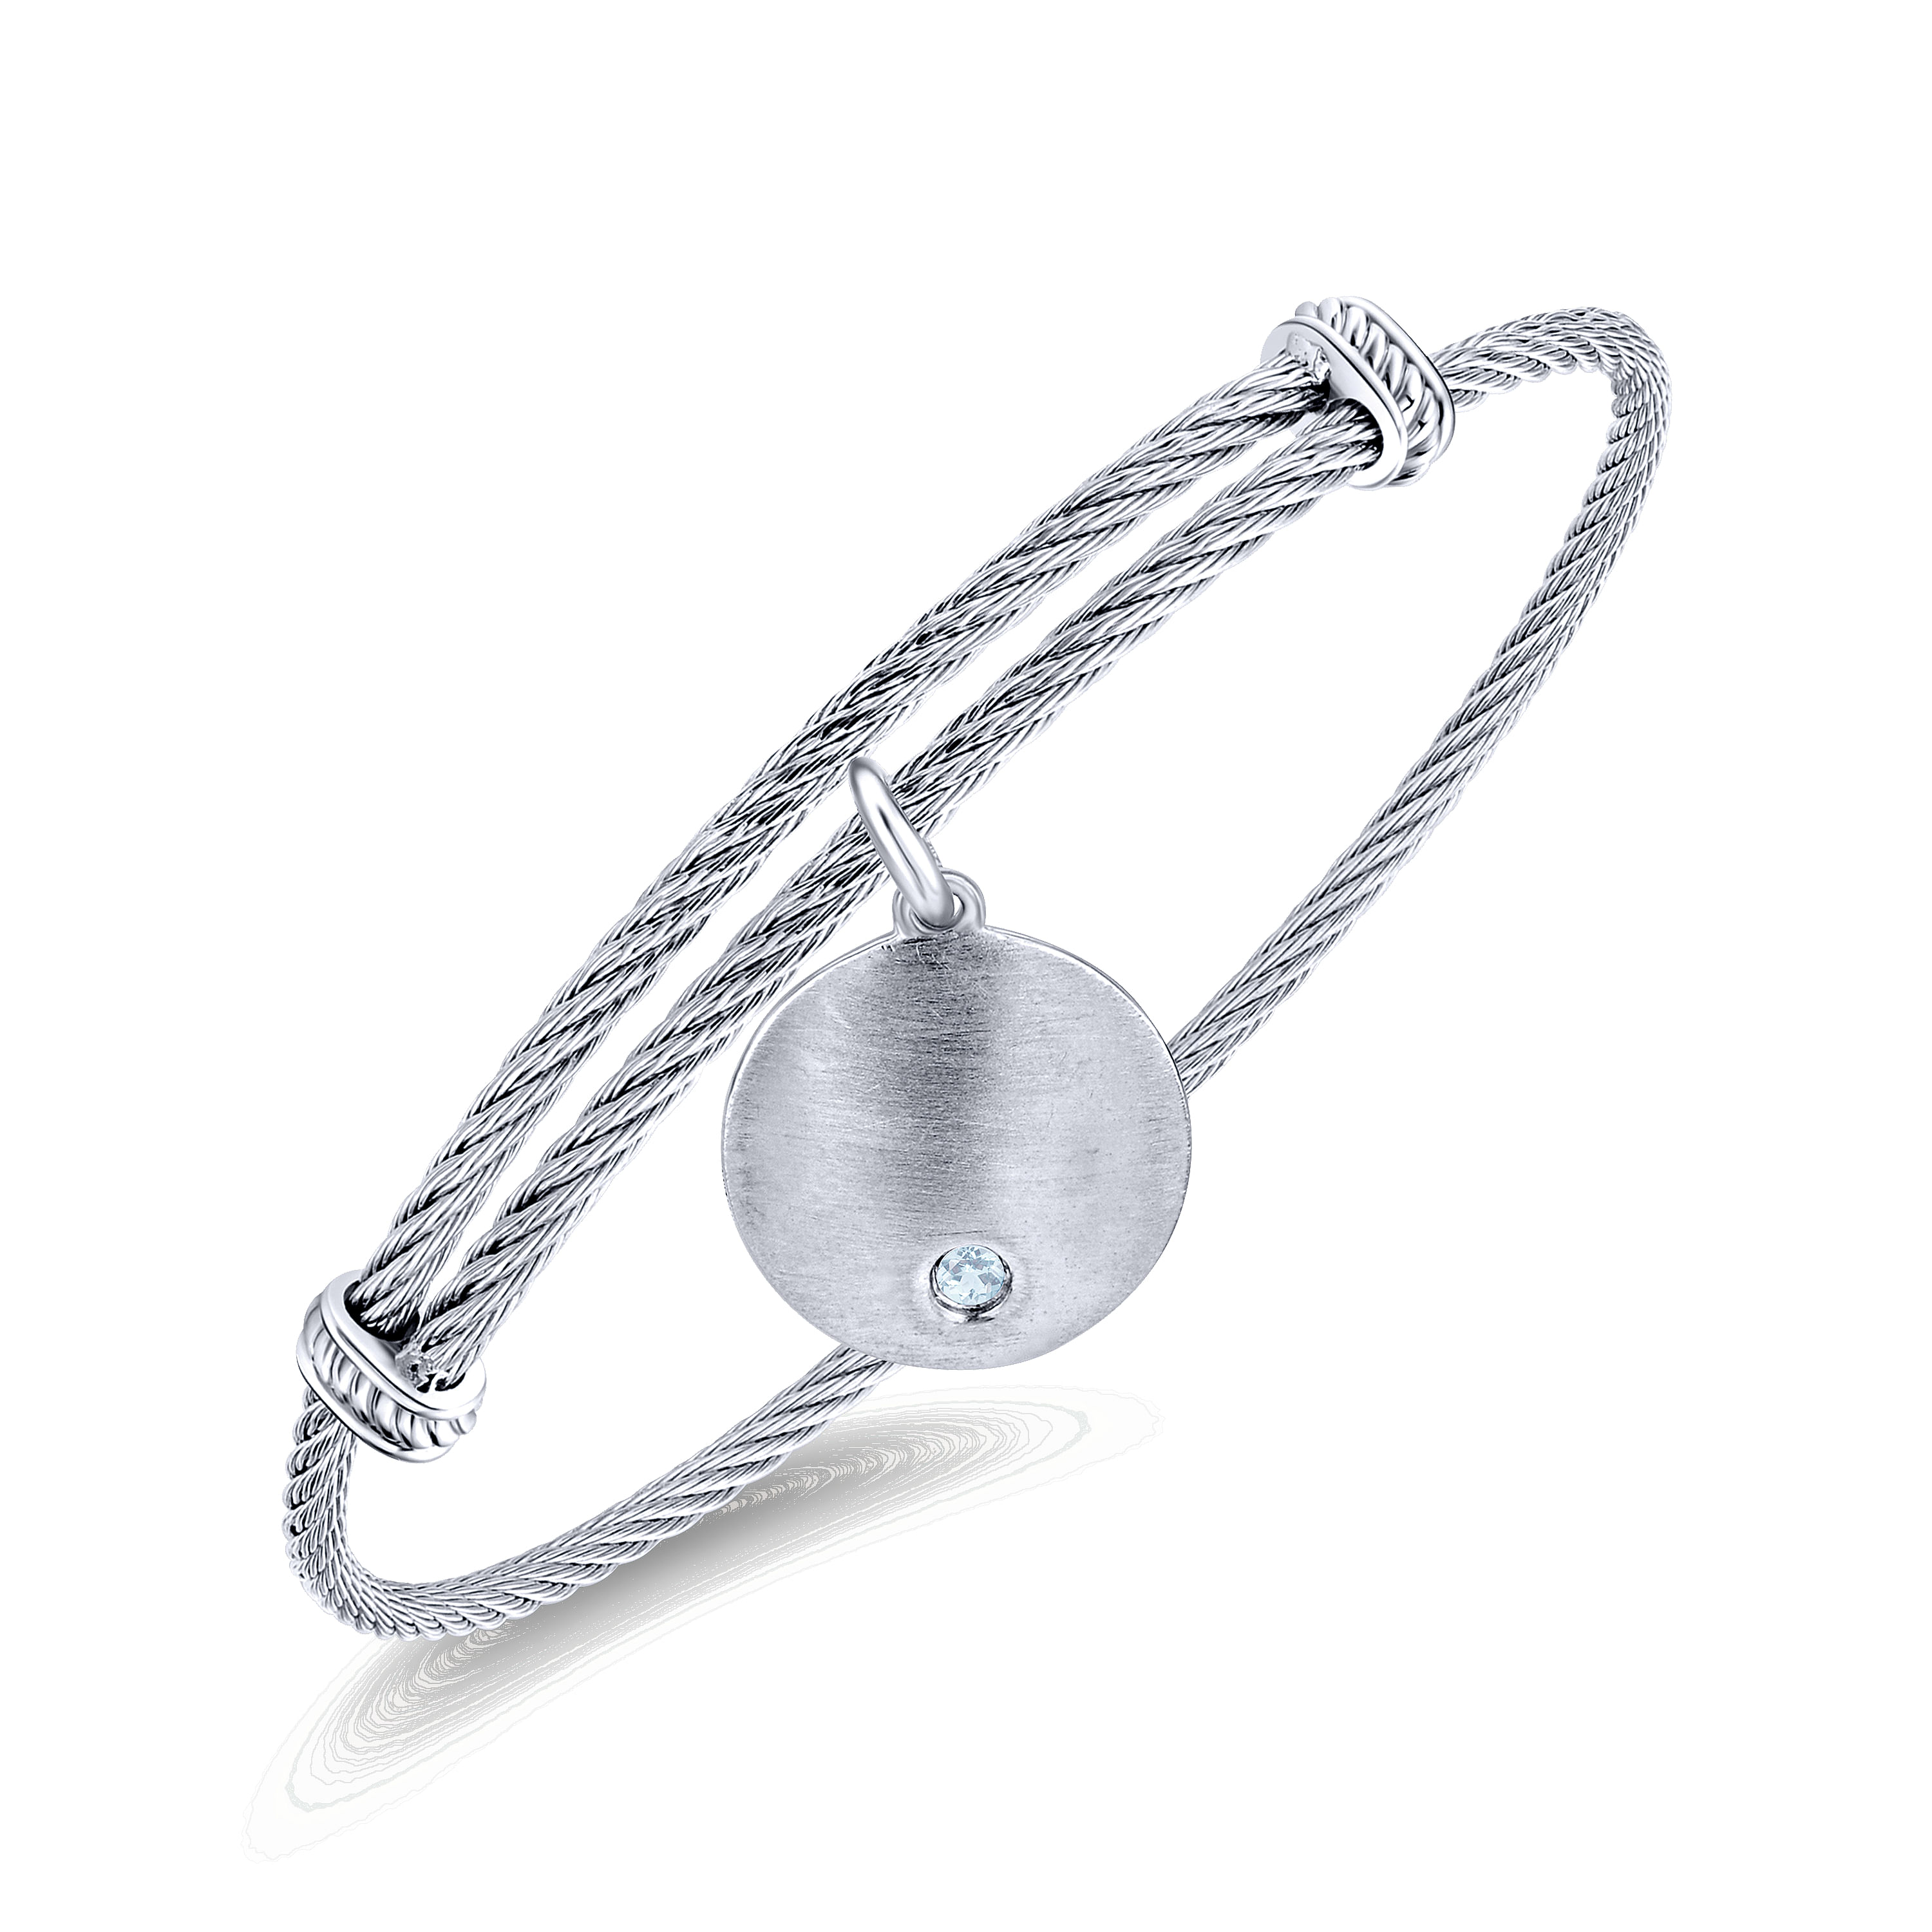 Adjustable Stainless Steel Bangle with Round Sterling Silver Sky Blue Topaz Stone Disc Charm